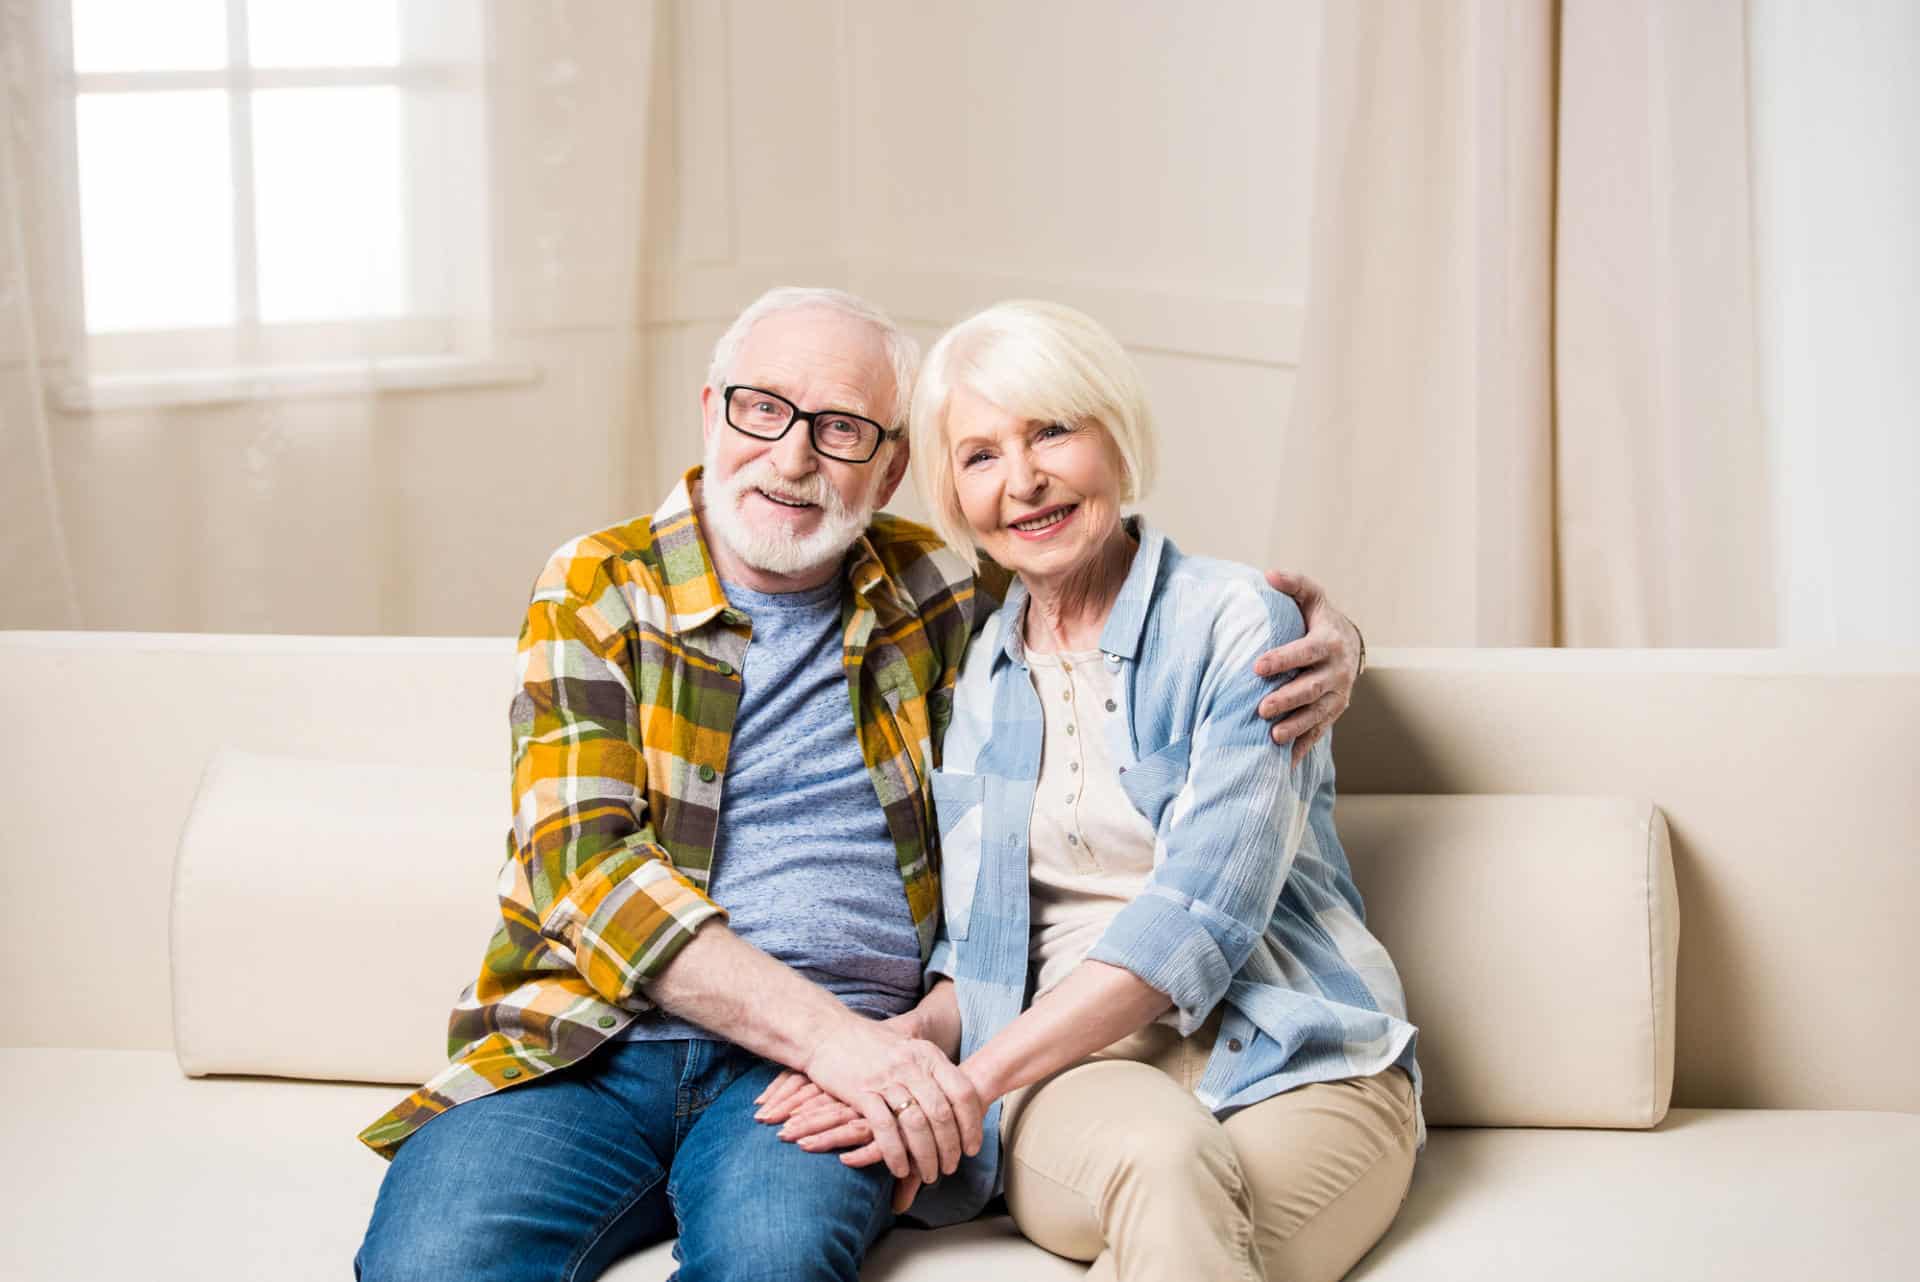 Elderly man and woman embracing on couch